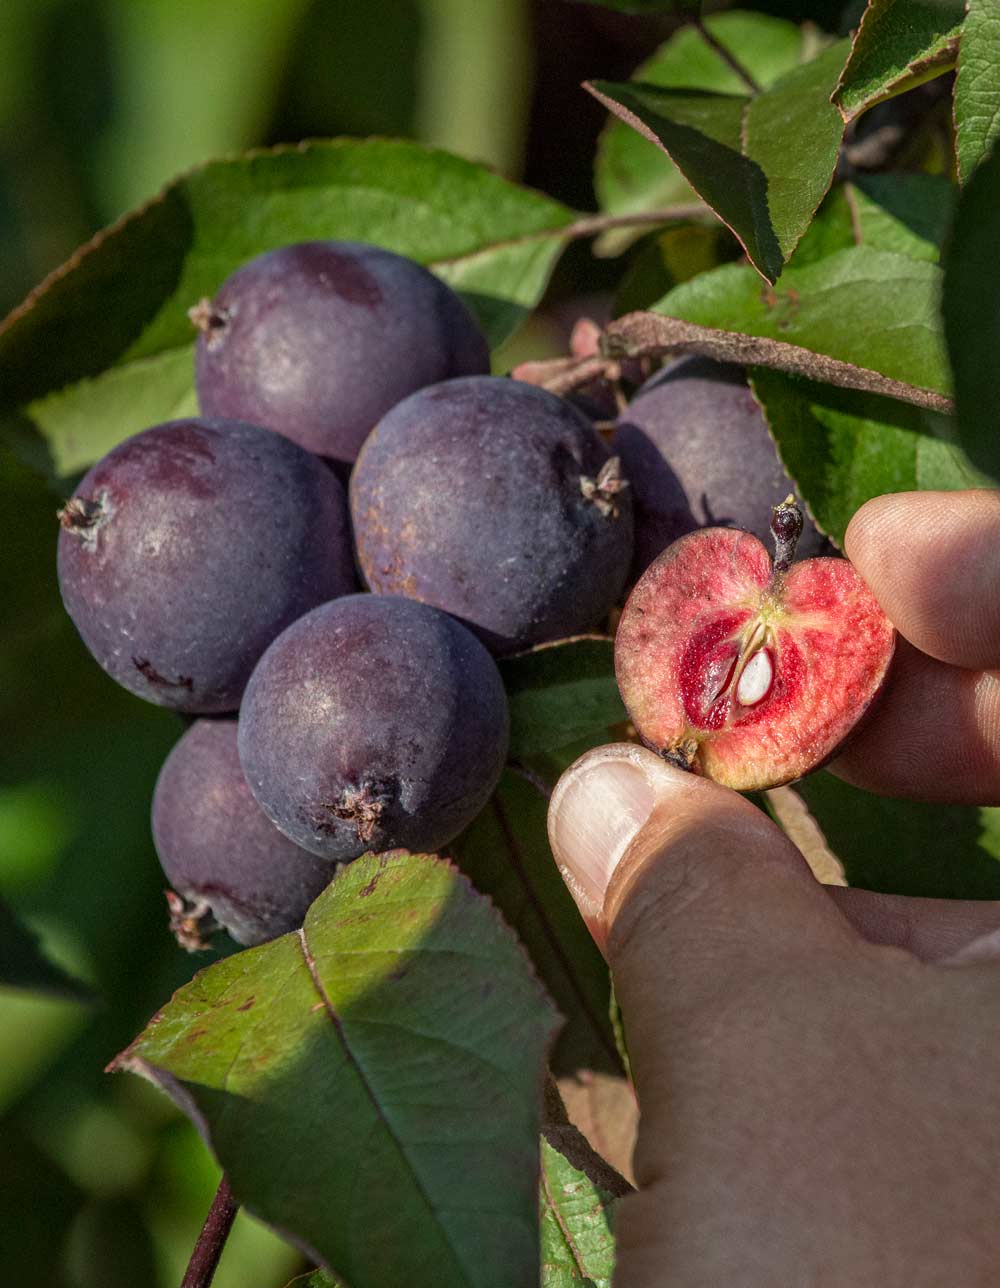 Thomas Chao splits open a Malus hybrid growing at the germplasm repository, showing its red flesh, a trait that has drawn interest from breeders and growers looking to add it to commercial apple varieties. Chao says the repository has the largest collection of Malus varieties outside of Central Asia. <b>(TJ Mullinax/Good Fruit Grower)</b>